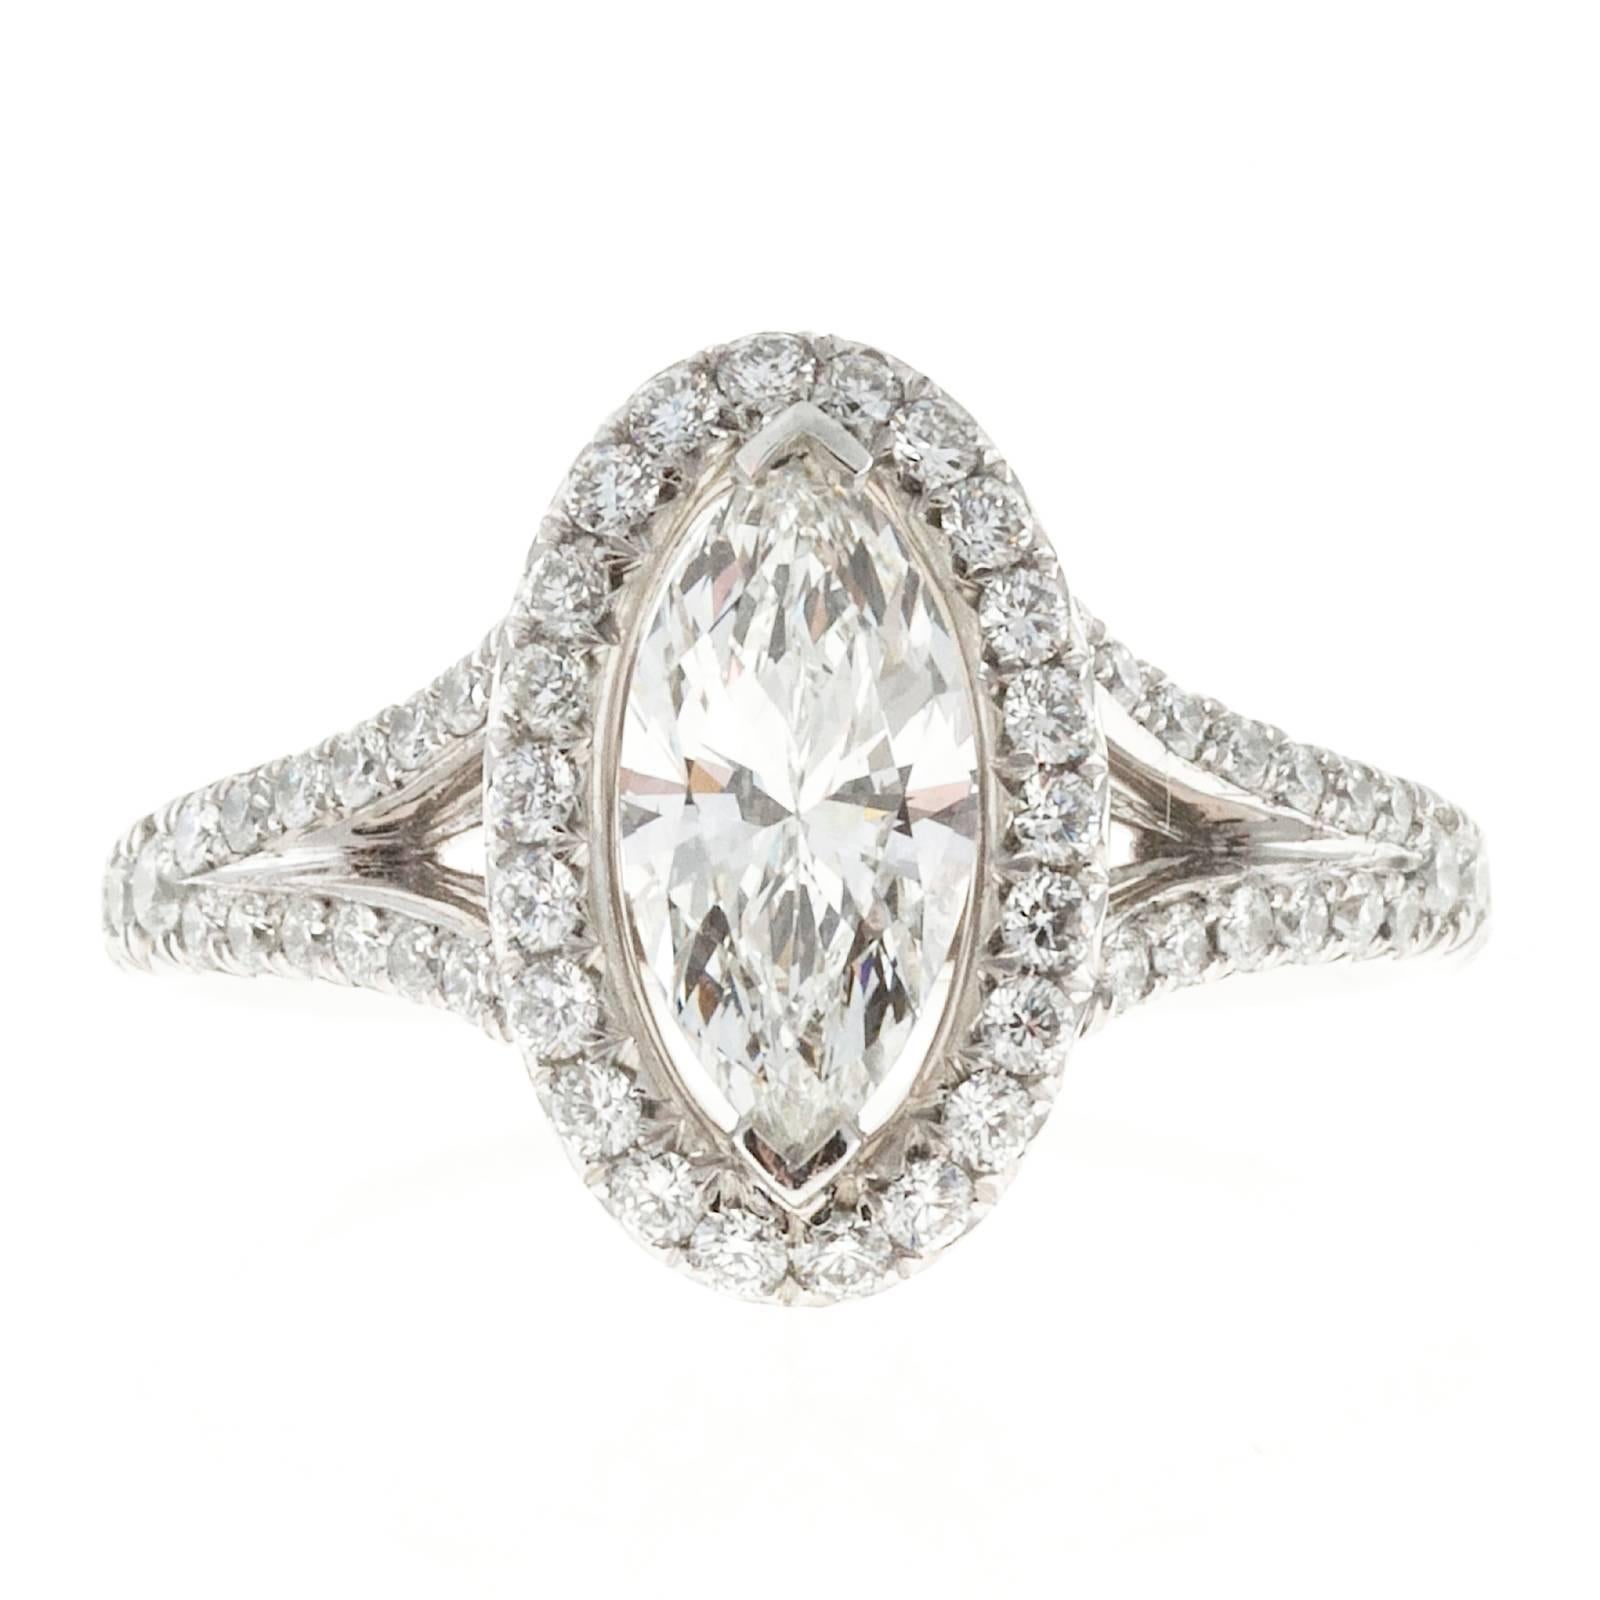 Pete Suchy Ideal cut Marquise diamond engagement ring 0.99ct in a custom design split platinum diamond shank with with an oval Halo of diamonds. GIA certificate # 6157172225

1 Ideal Marquise diamond, approx. total weight .99cts, H, SI1, Depth: